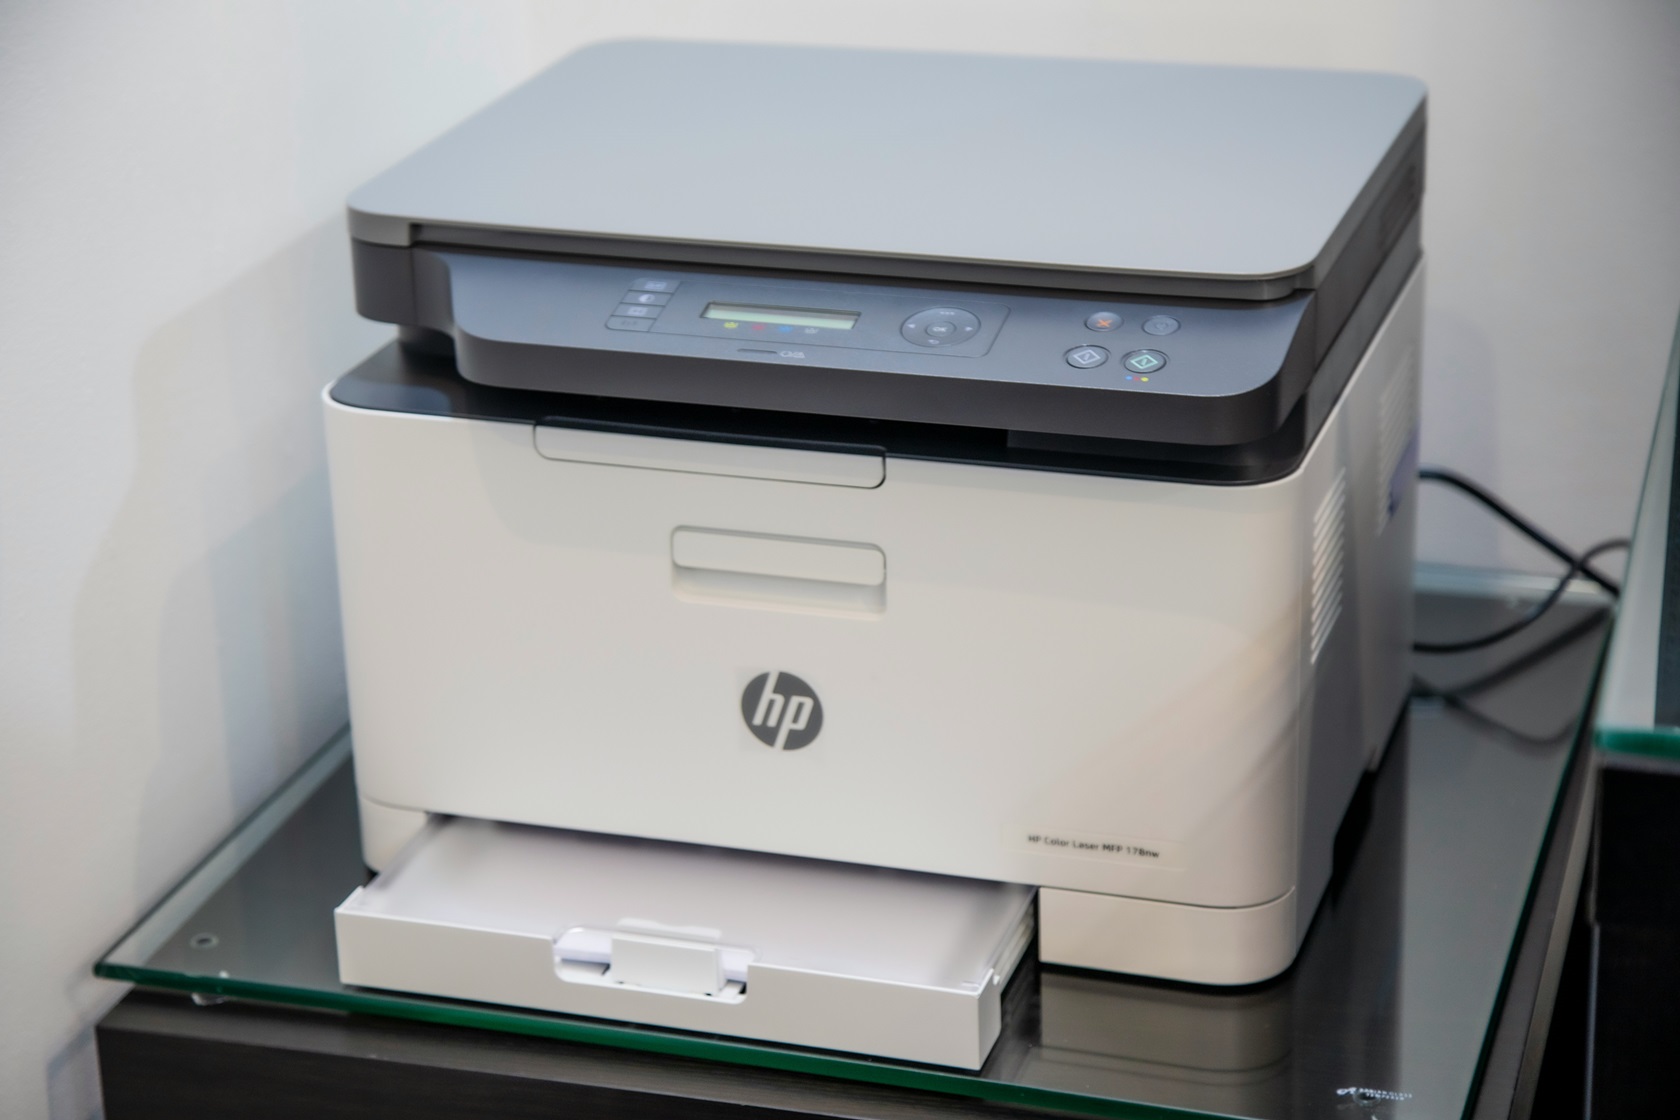 How to Fax From HP Printer?